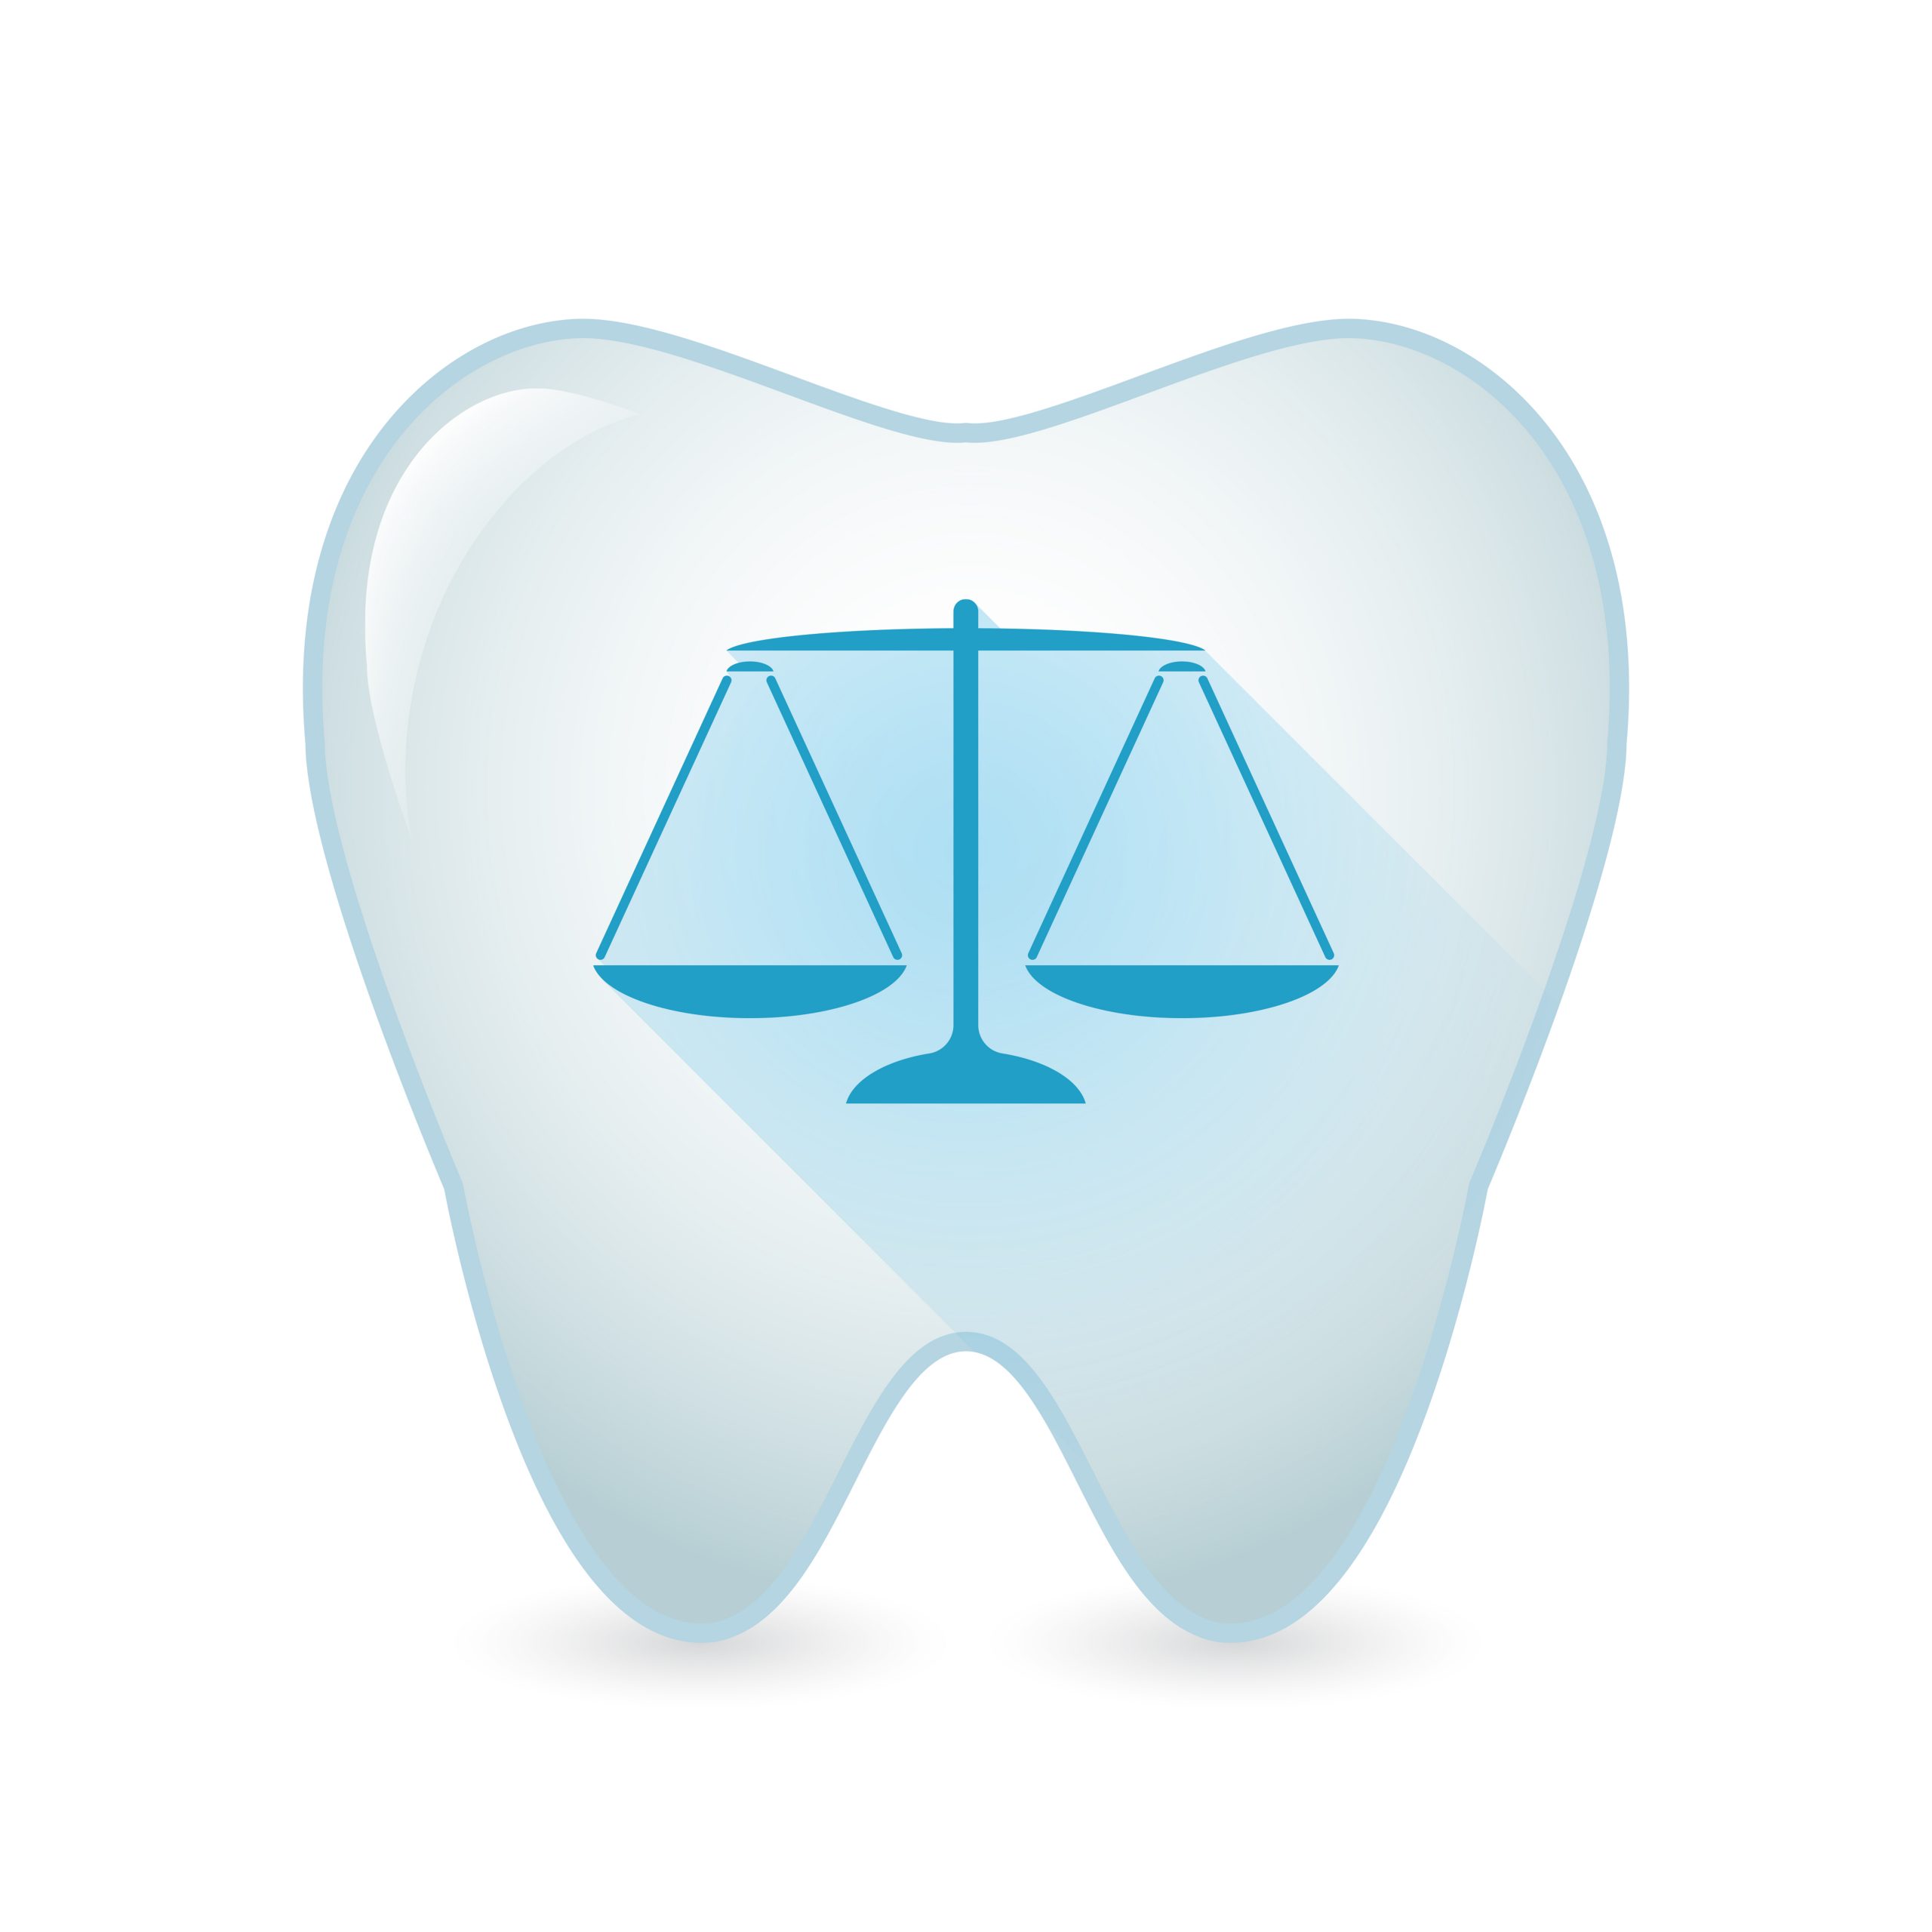 Illustration of an isolated tooth icon with a weight scale